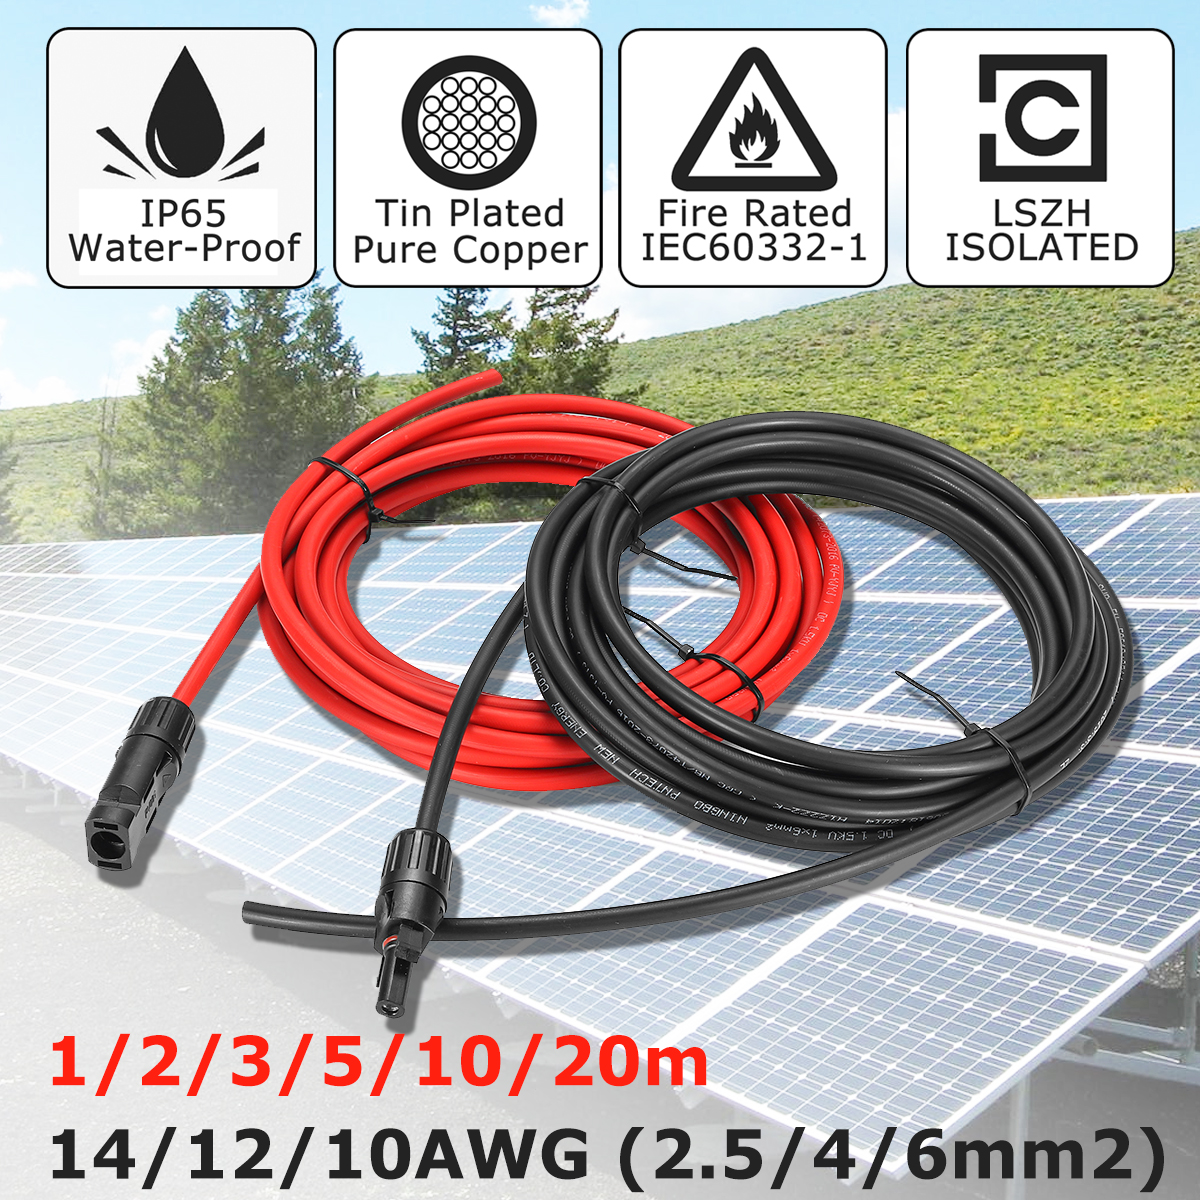 33A--1235M-25mmsup2-14AWG-Eternal-53mm-Solar-Panel-Extension-Cable-Wire-MC4-Connector-Copper-Wire-So-1479415-1